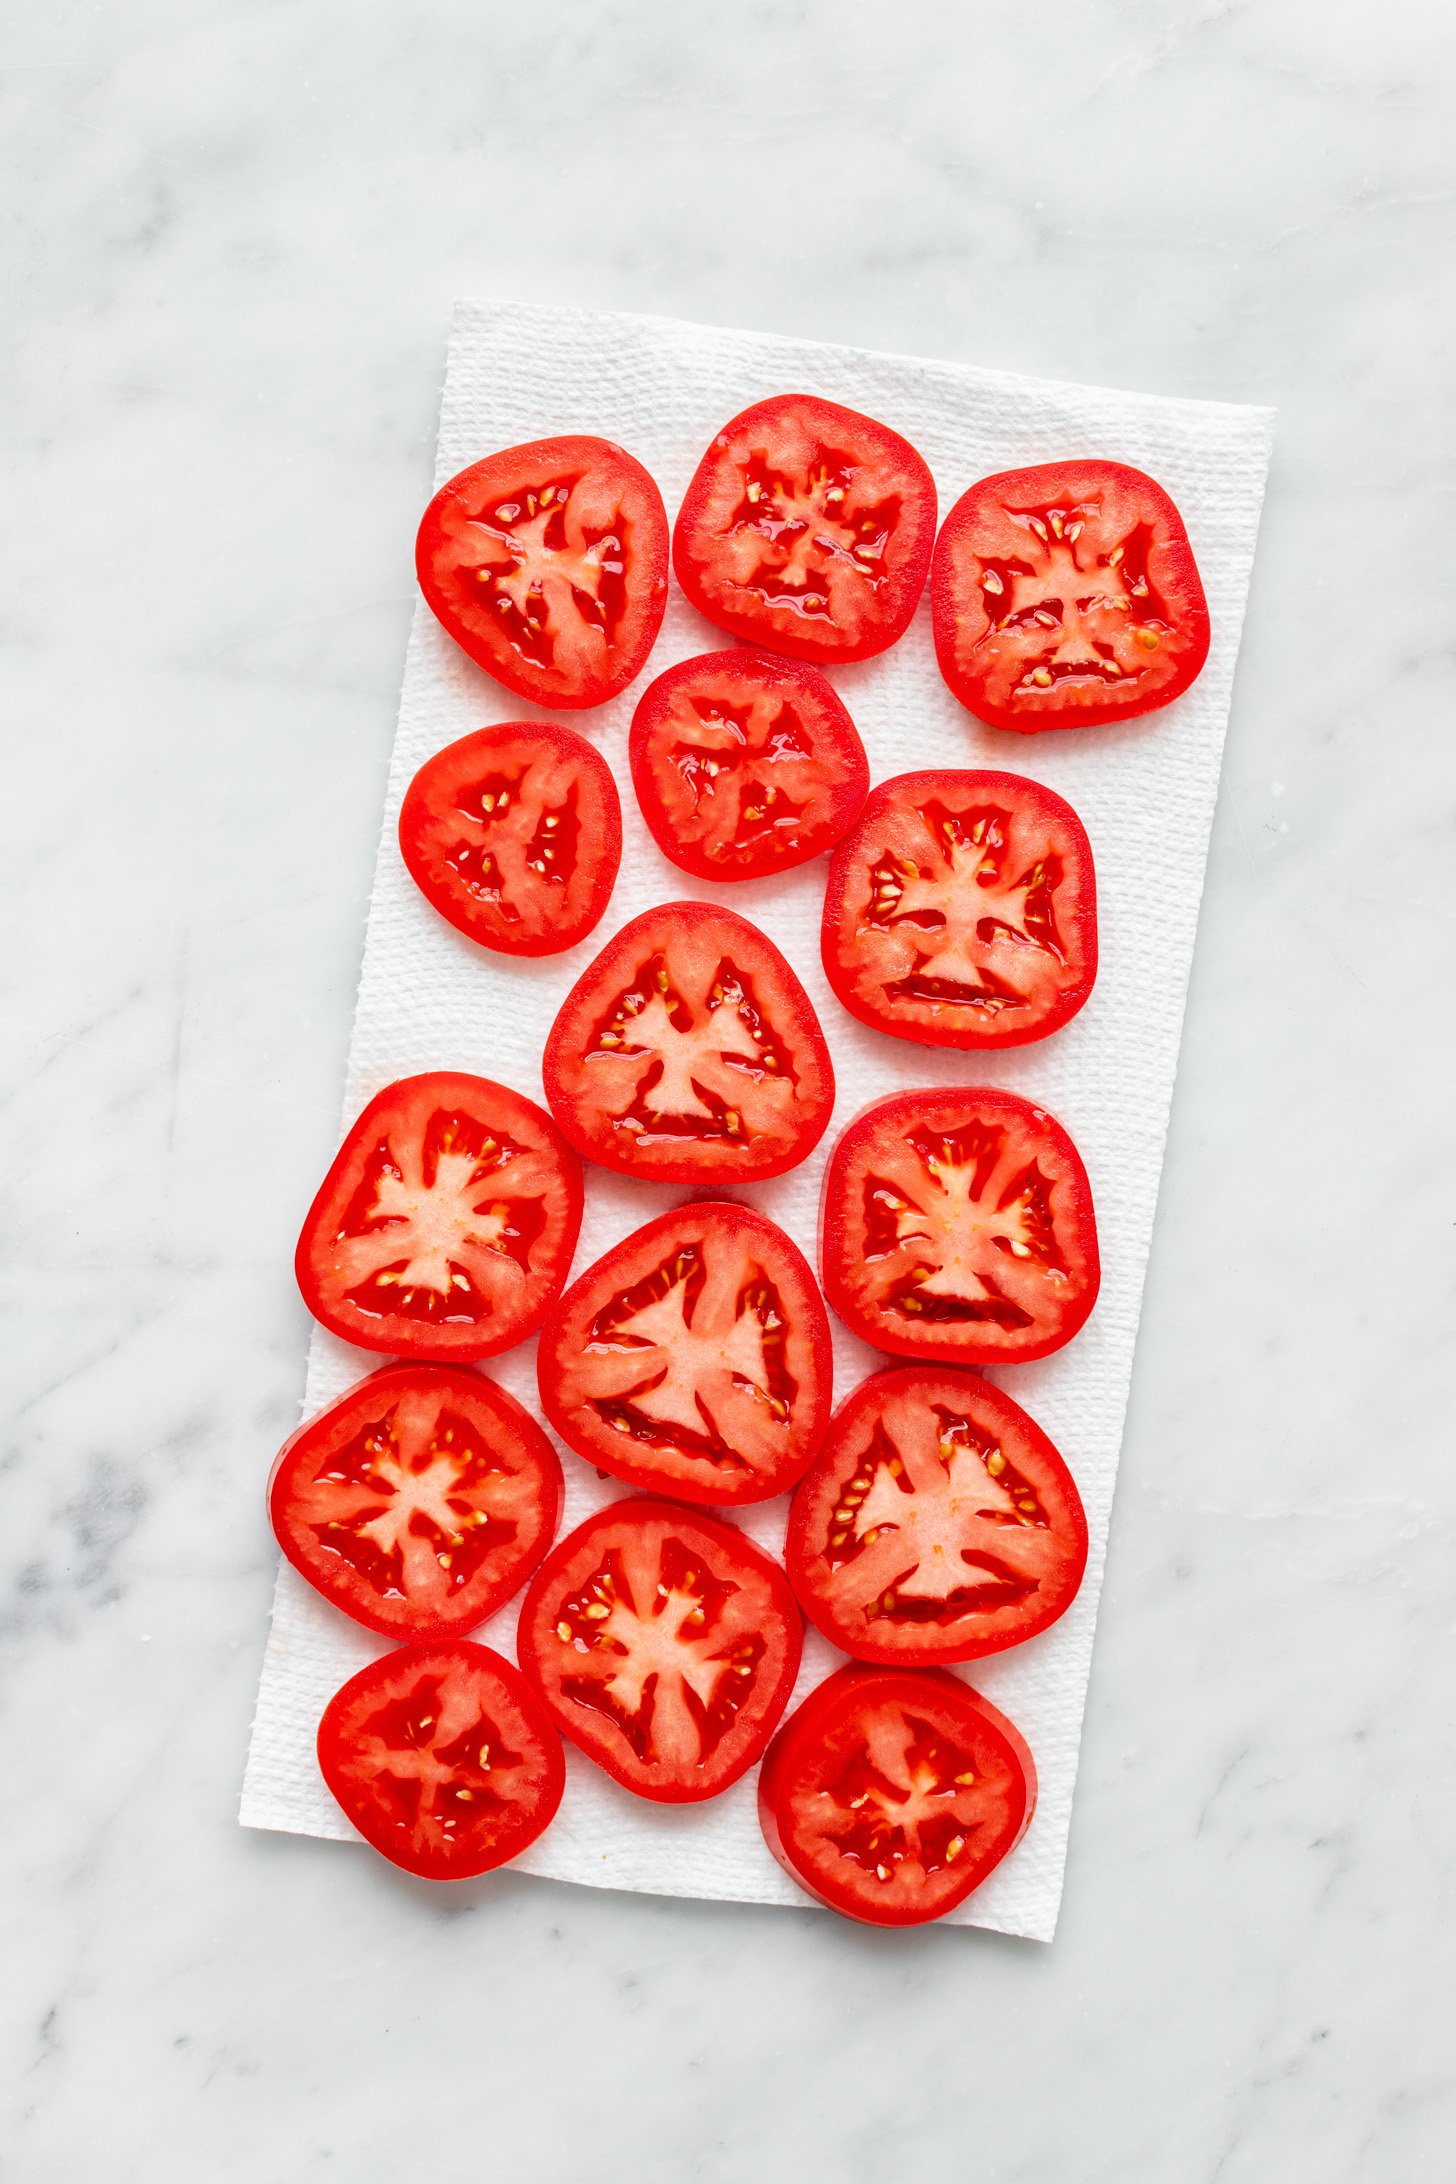 Slices of tomato on a paper towel sitting on top of a white marble surface. 